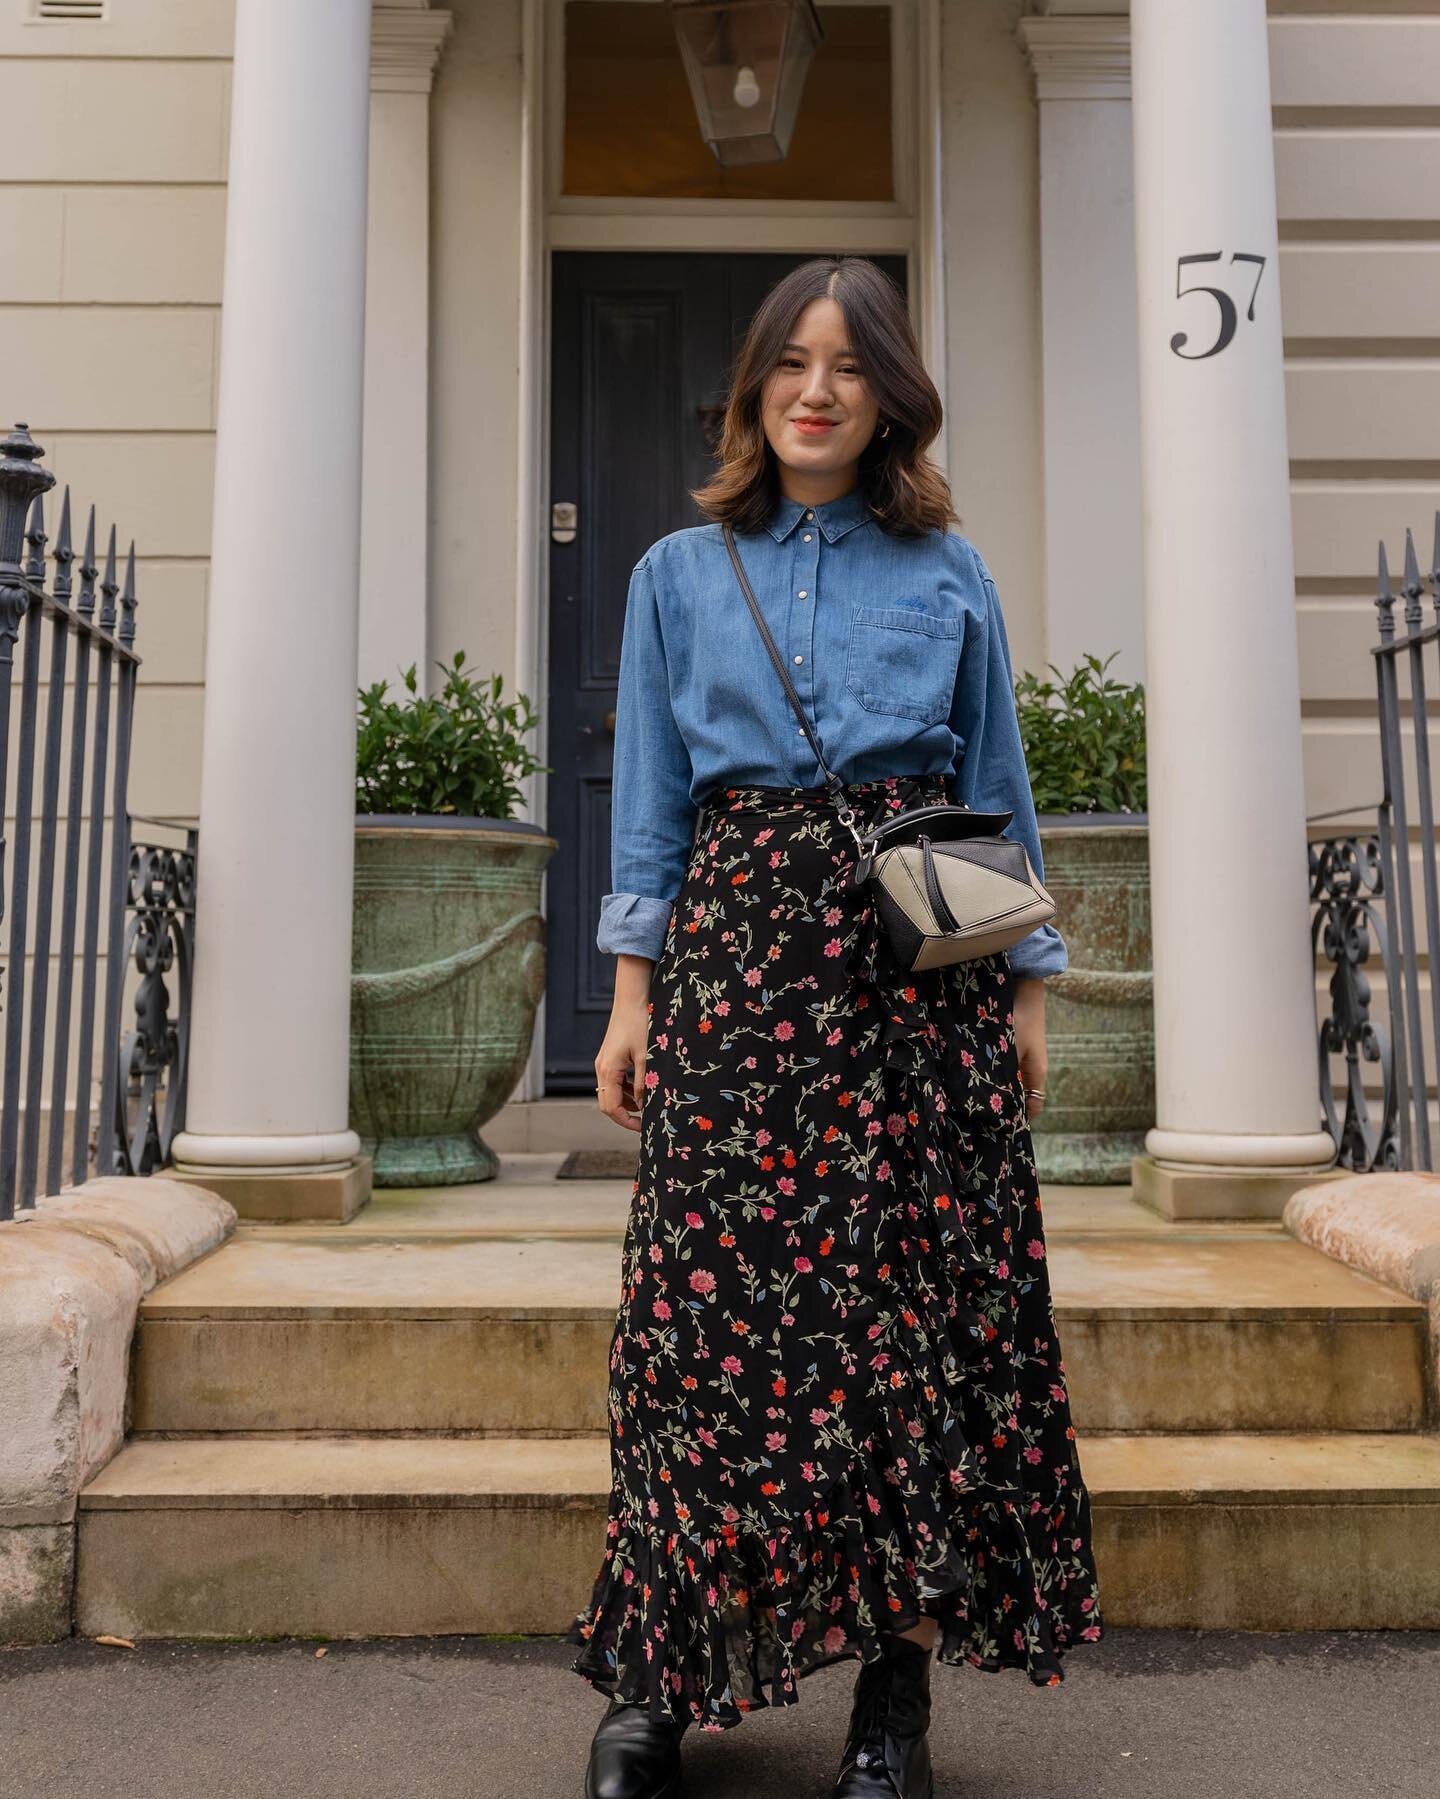 Matching this very colourful skirt with a denim shirt today. When in doubt, I like to pick out a colour on the print and match my outfit to the print. There&rsquo;s some blue in the floral and I used my blue shirt to tie in with the skirt⁣
⁣
⁣
⁣
⁣
⁣
